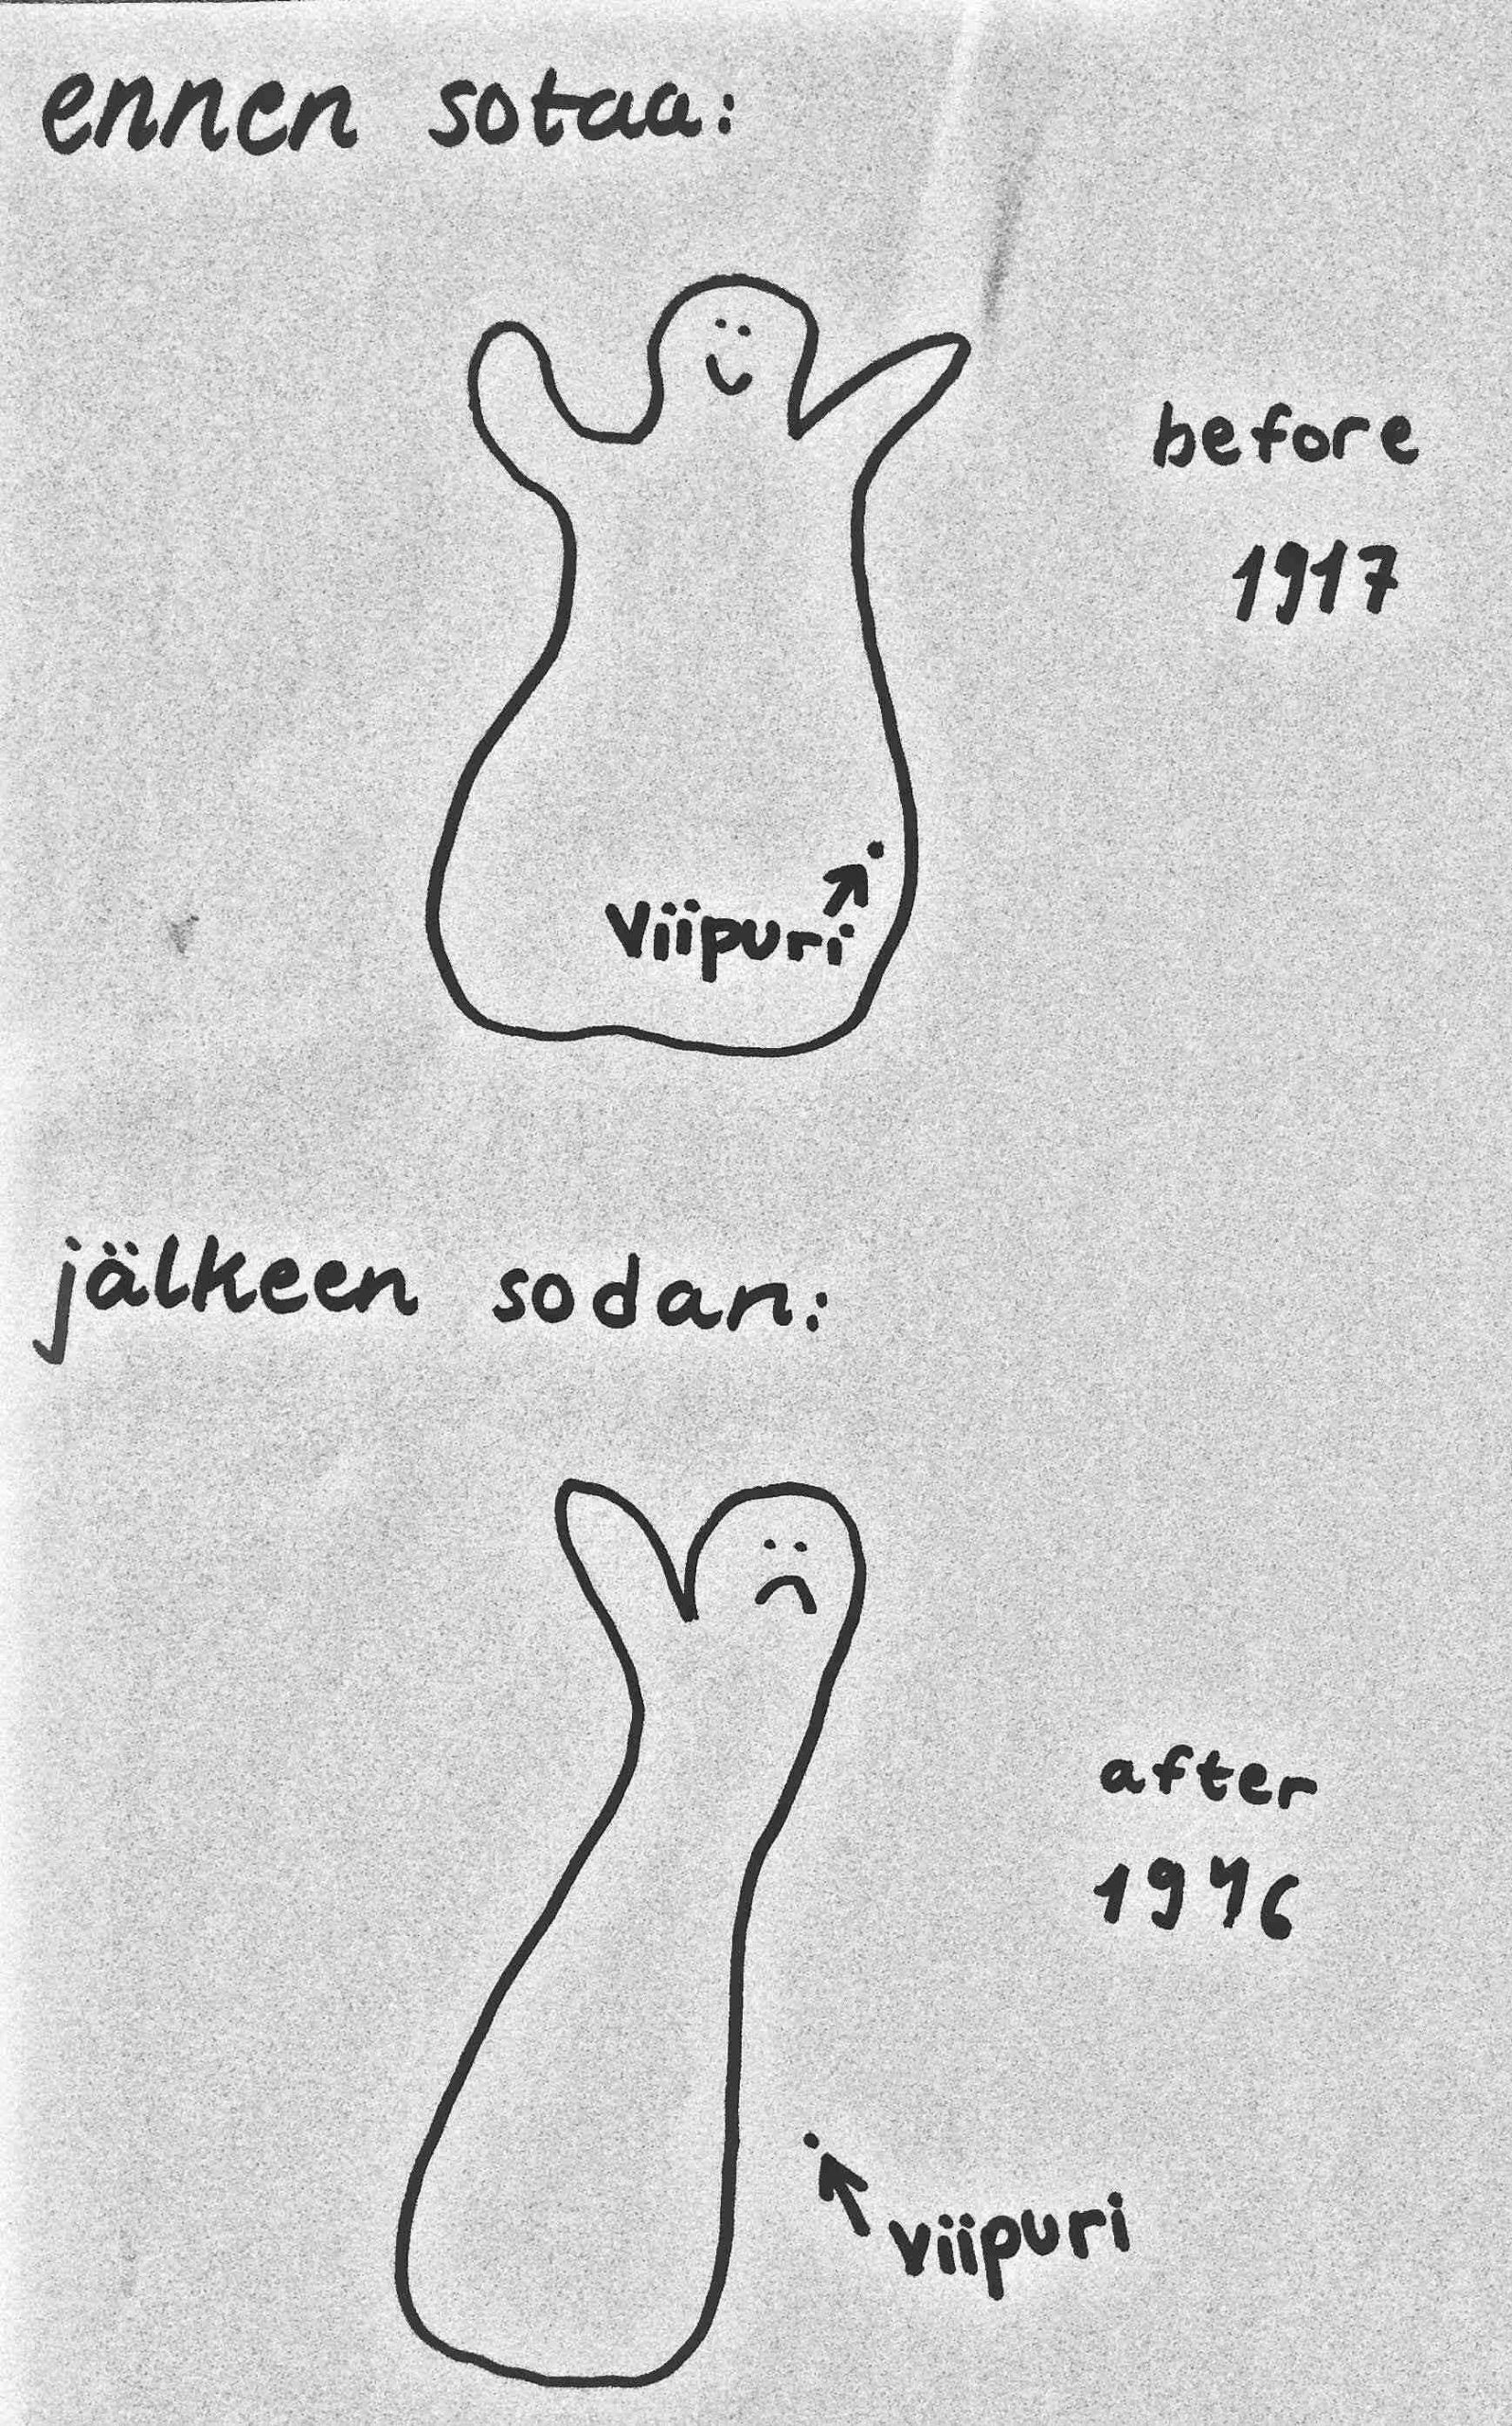 Drawing: First, map of Finland pictured as a laughing body with both arms with the text "before war, before 1917”. Second, map of Finland pictured as a sad and slimmer body, only with one arm with the text "after war, after 1946”. Viborg included in Finland in the first map, in the second map, marked outside the border.